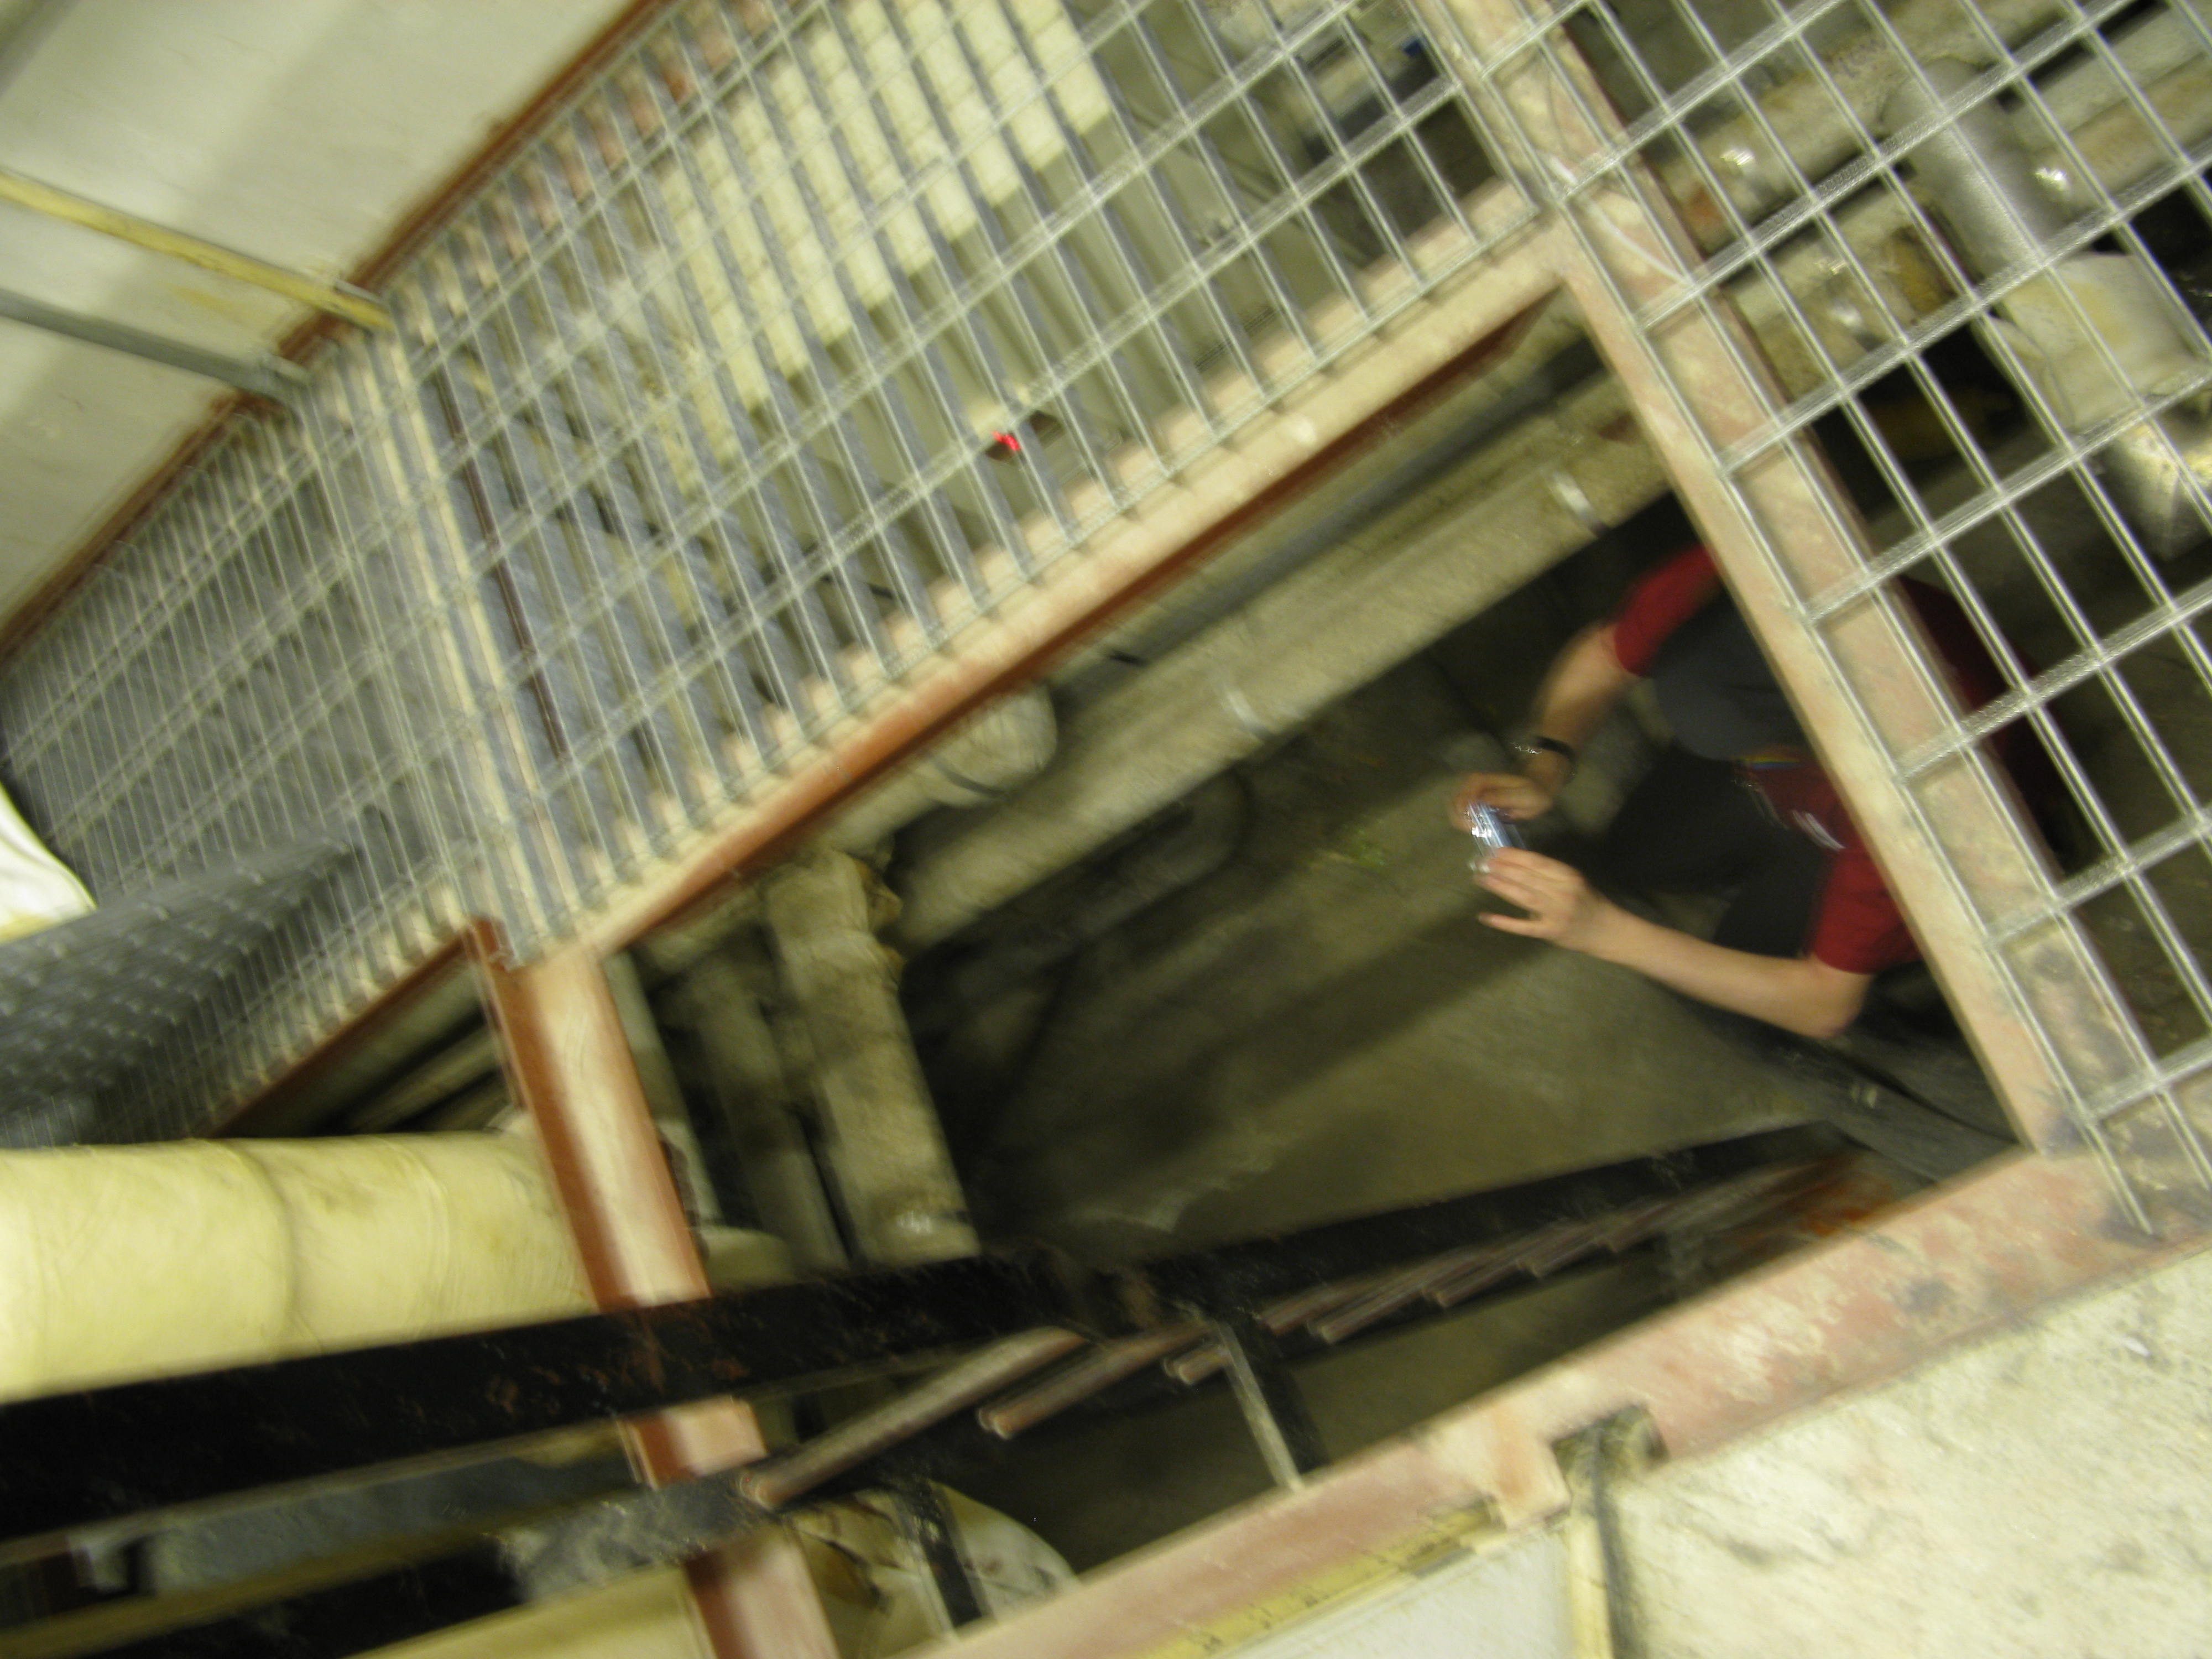 Gary Tull taking photos of the duct below H core